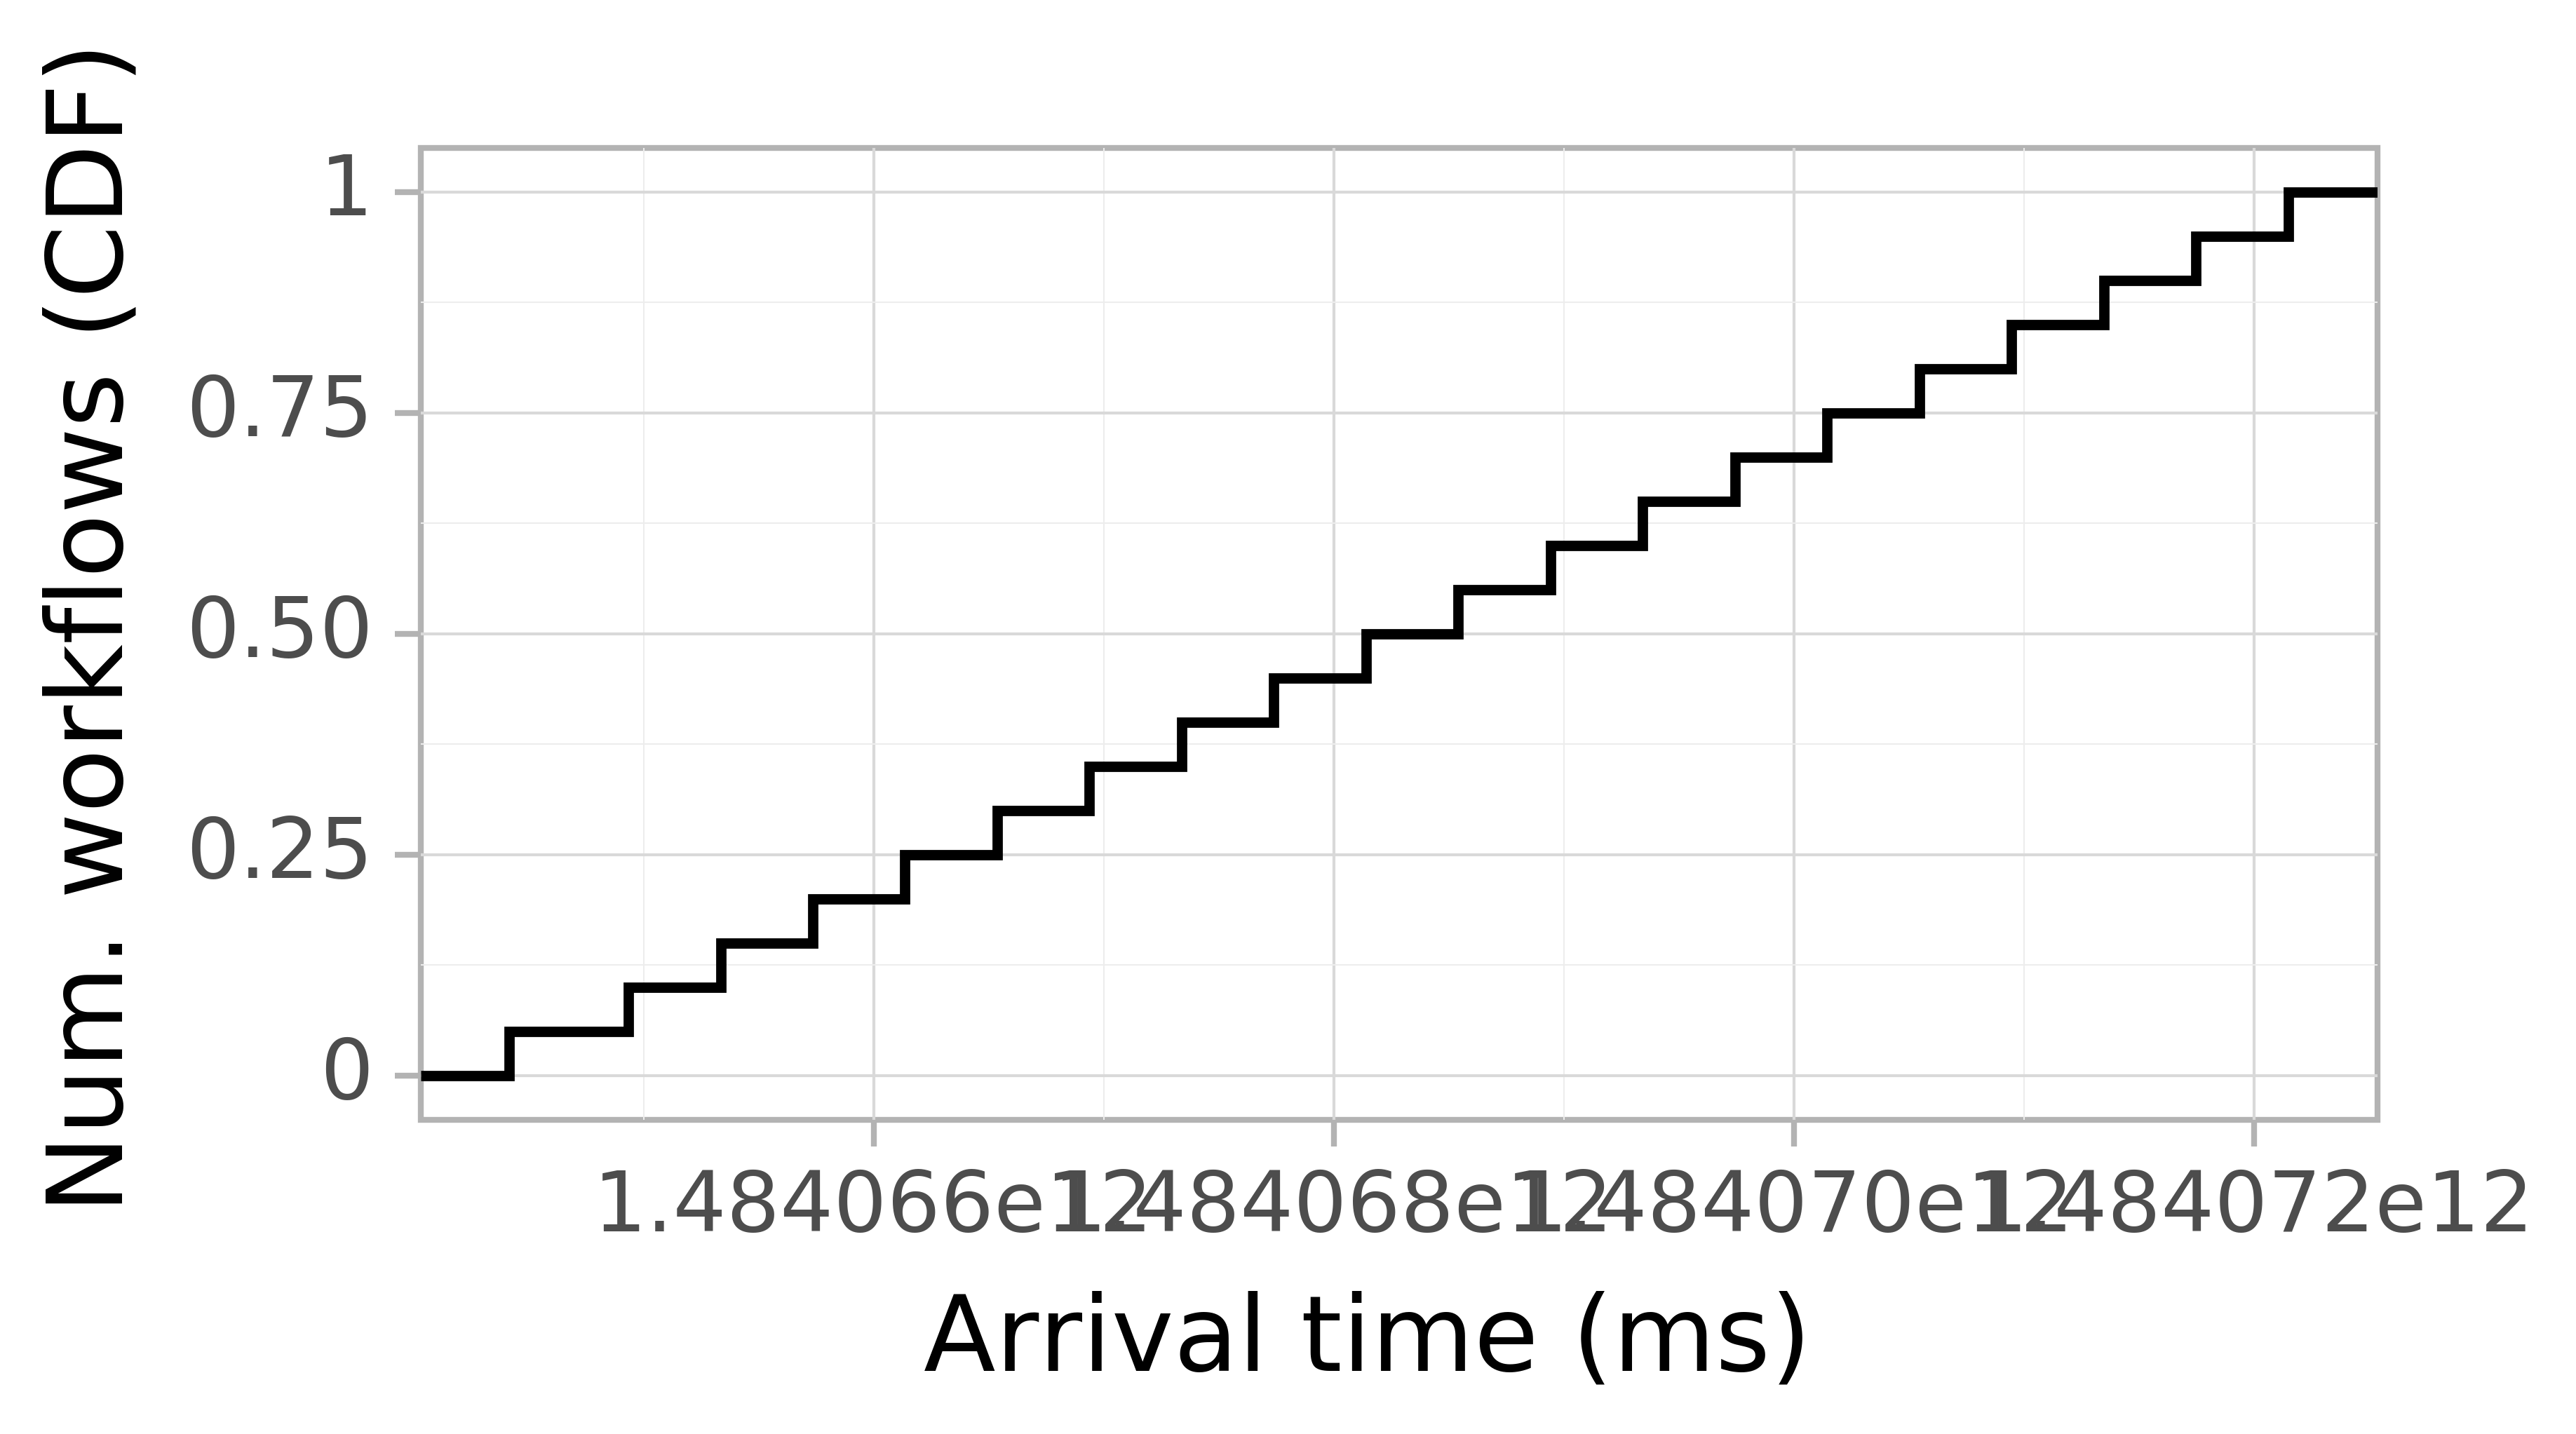 Job arrival CDF graph for the askalon-new_ee19 trace.